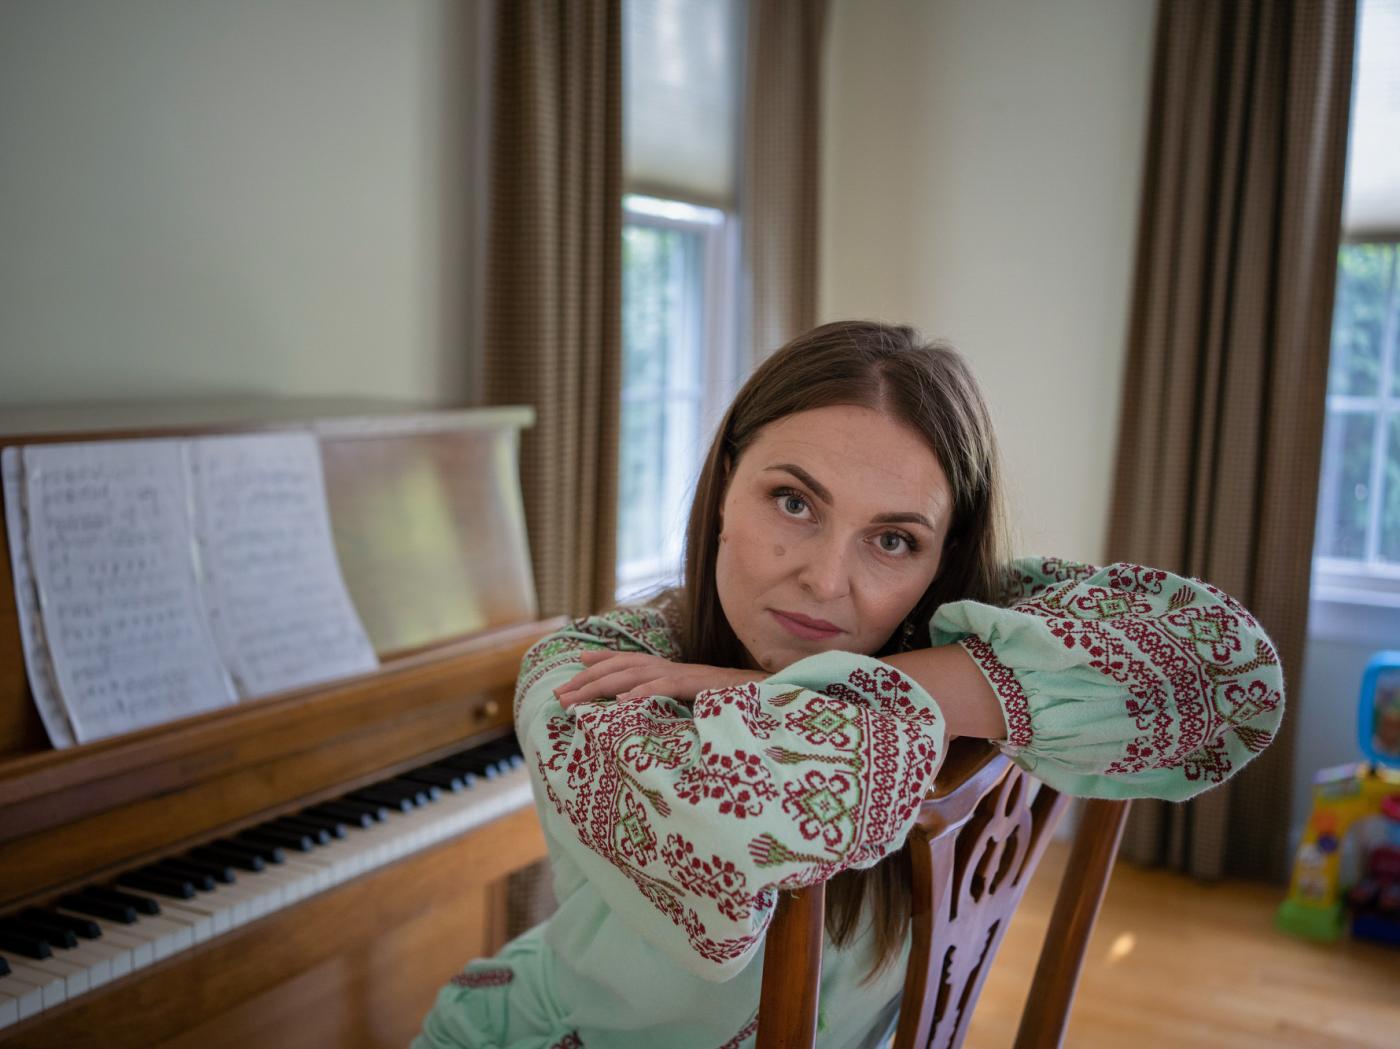 Olha Abakumova is an opera singer and a member of the Khmelnytskyi Regional Philharmonic and a music teacher. When she came to the U.S. with her daughter, she made sure to find room in her suitcase for her most treasured sheet music for Ukrainian arias that she sings.